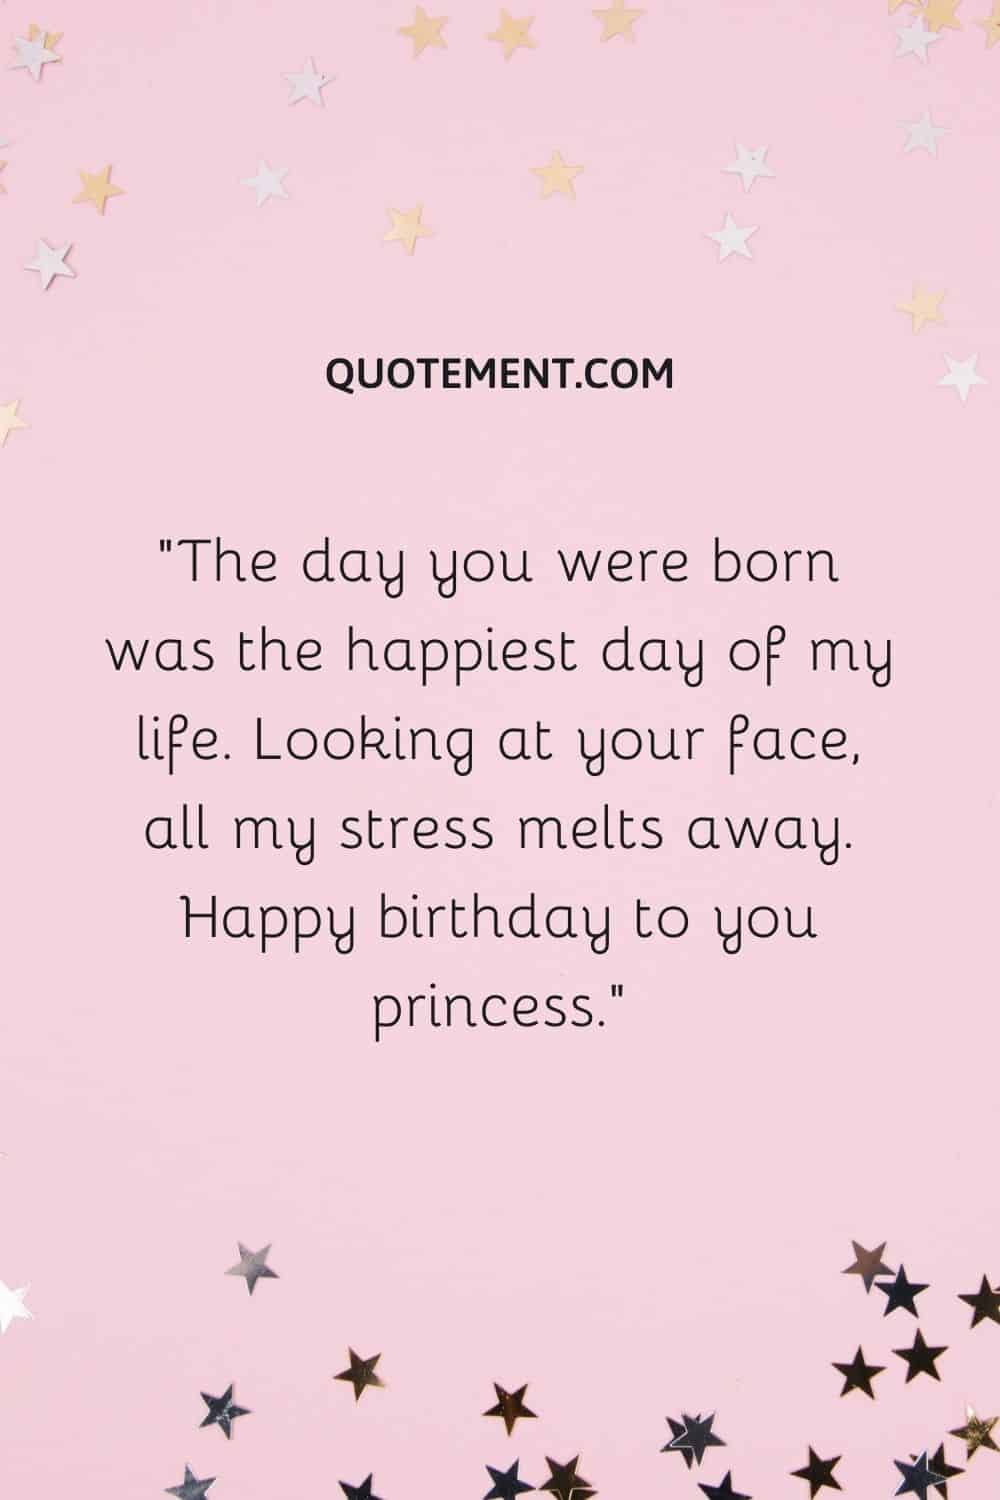 The day you were born was the happiest day of my life